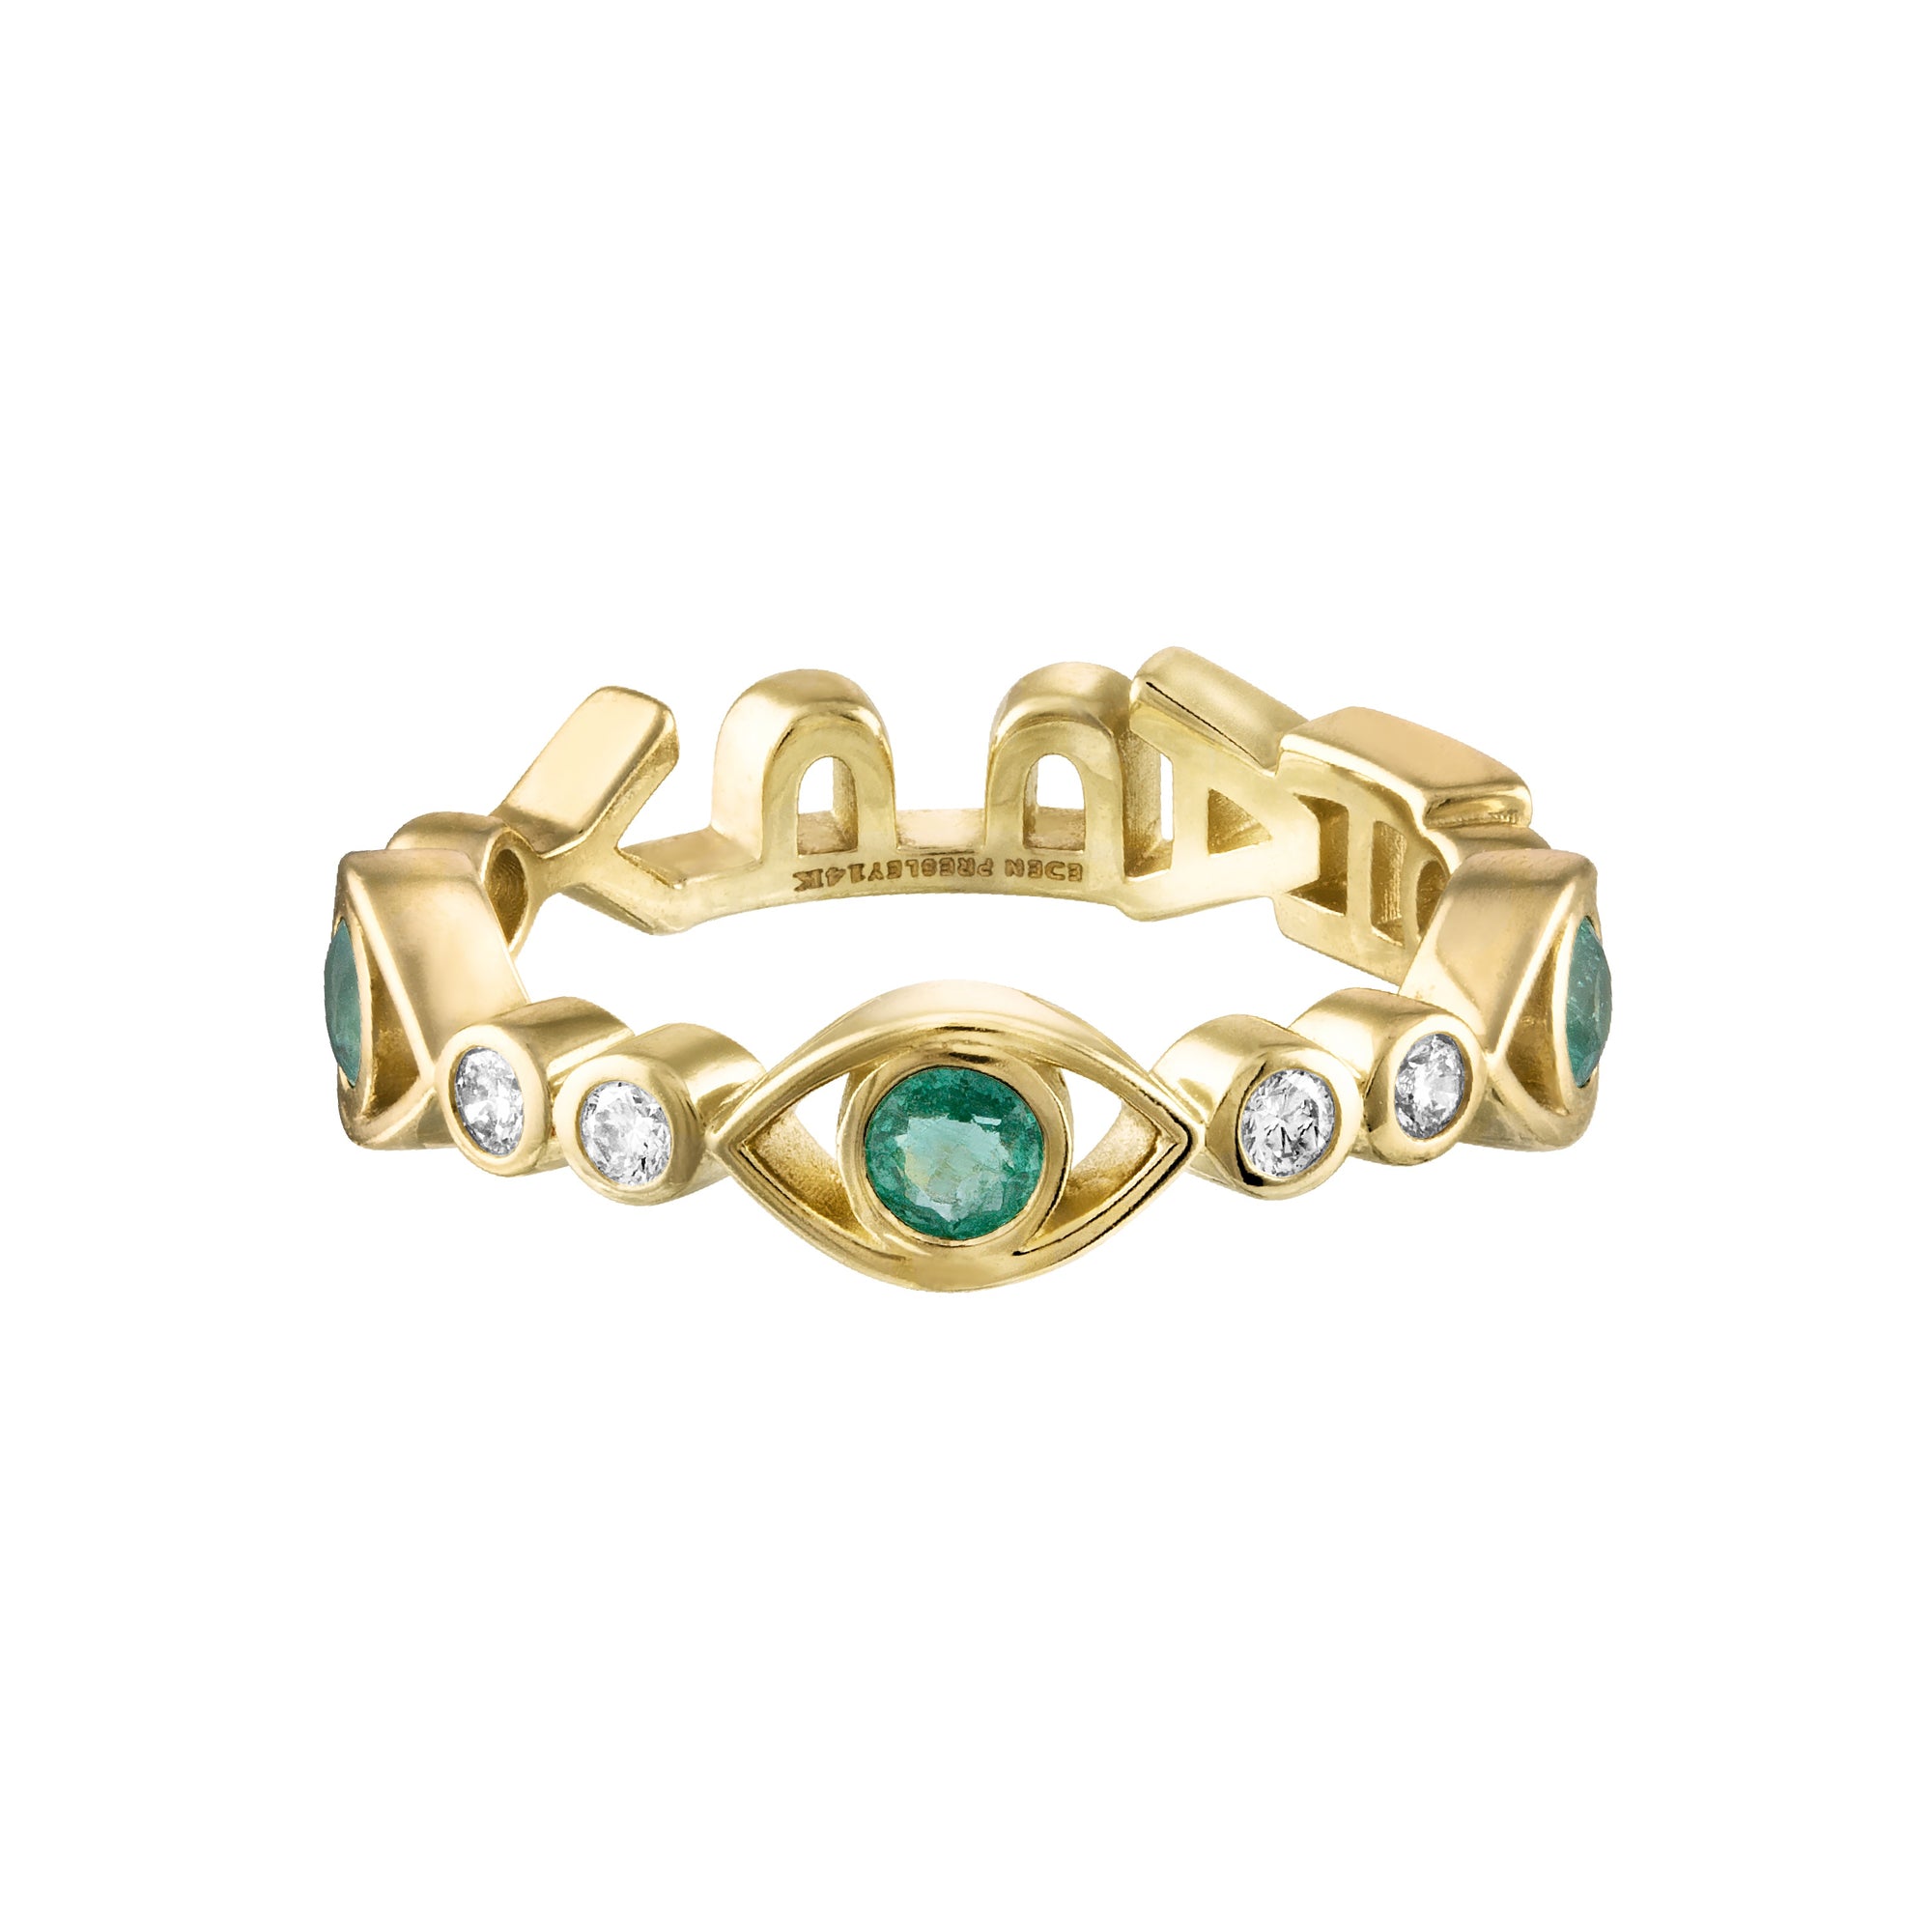 Tattoo Candy Mantra Ring by Eden Presley